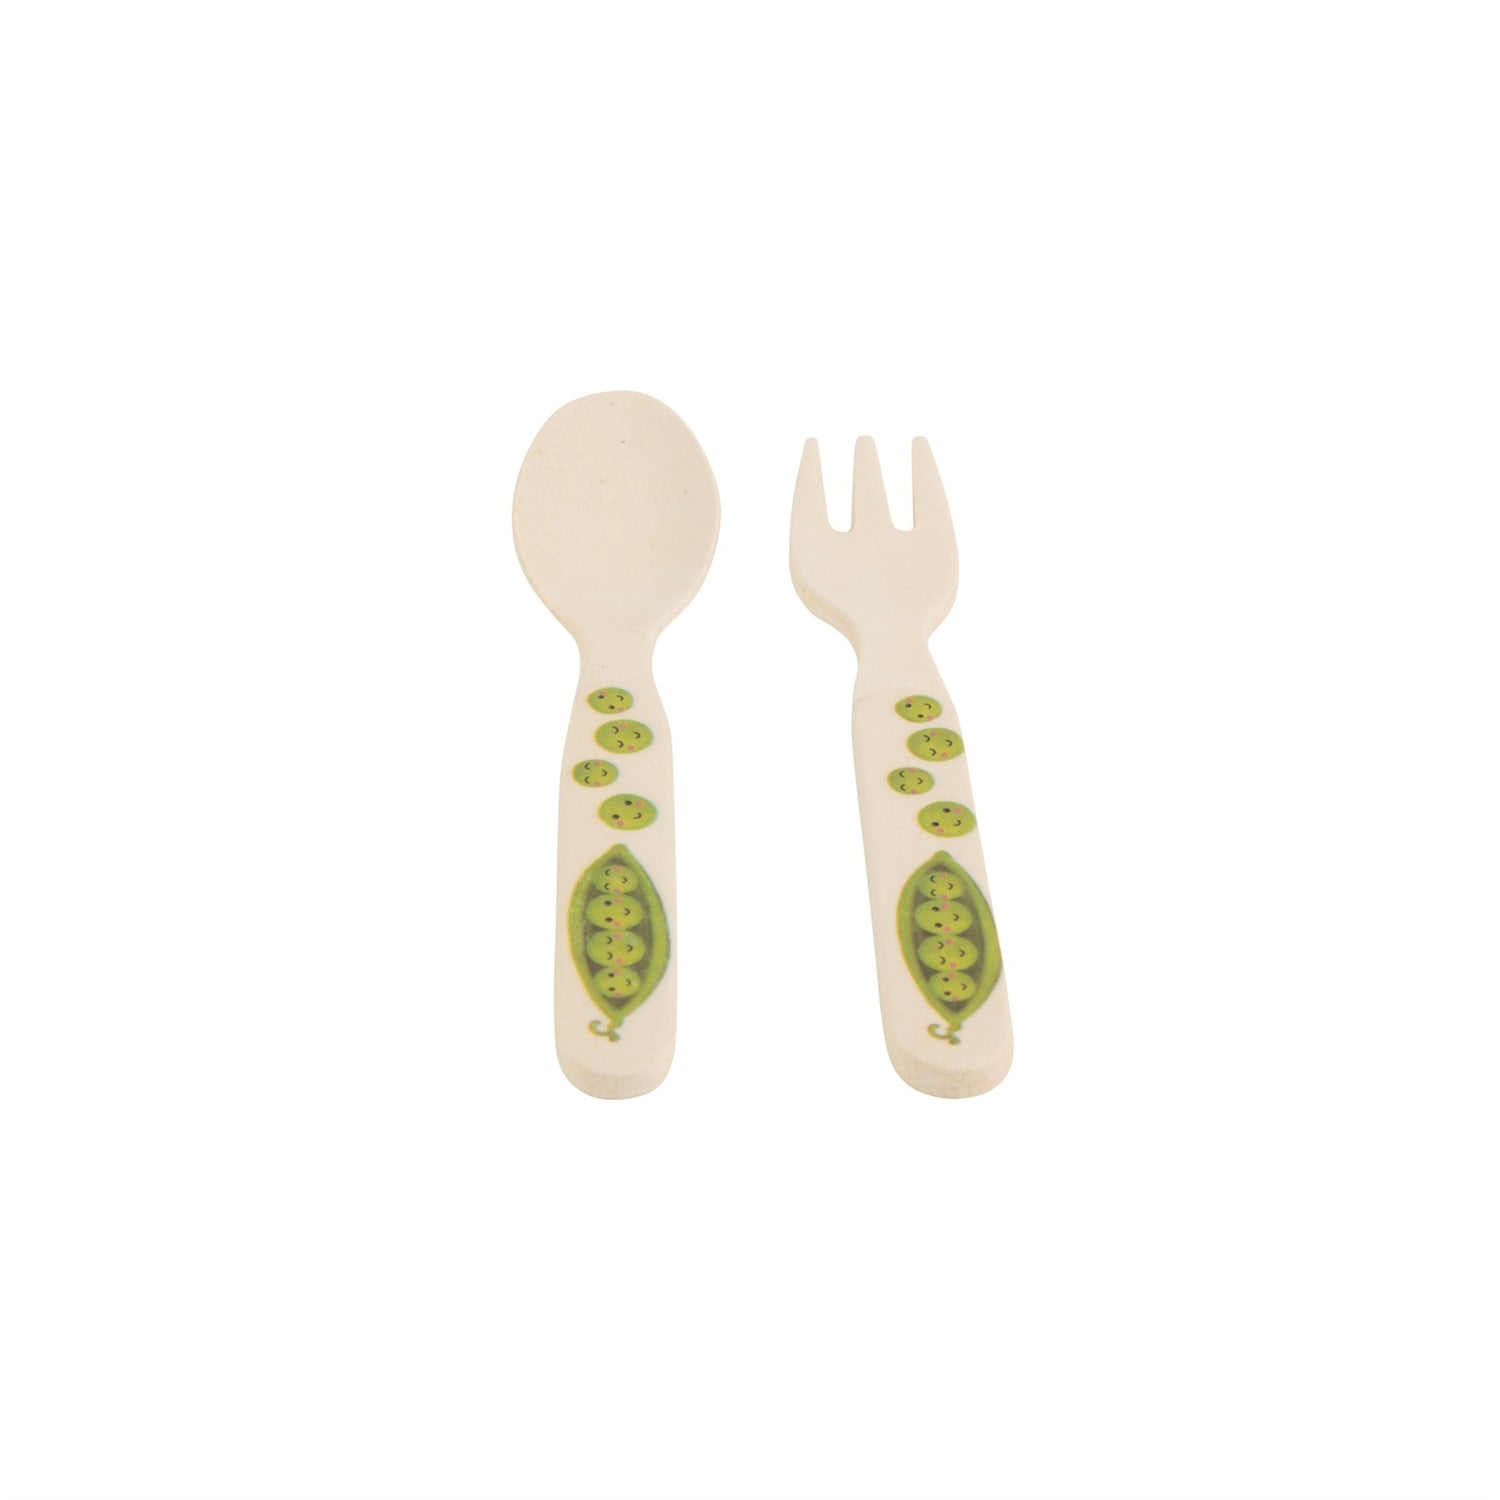 Stay healthy with this gorgeous bamboo cutlery set (fork and spoon) featuring fun peas in a pod.